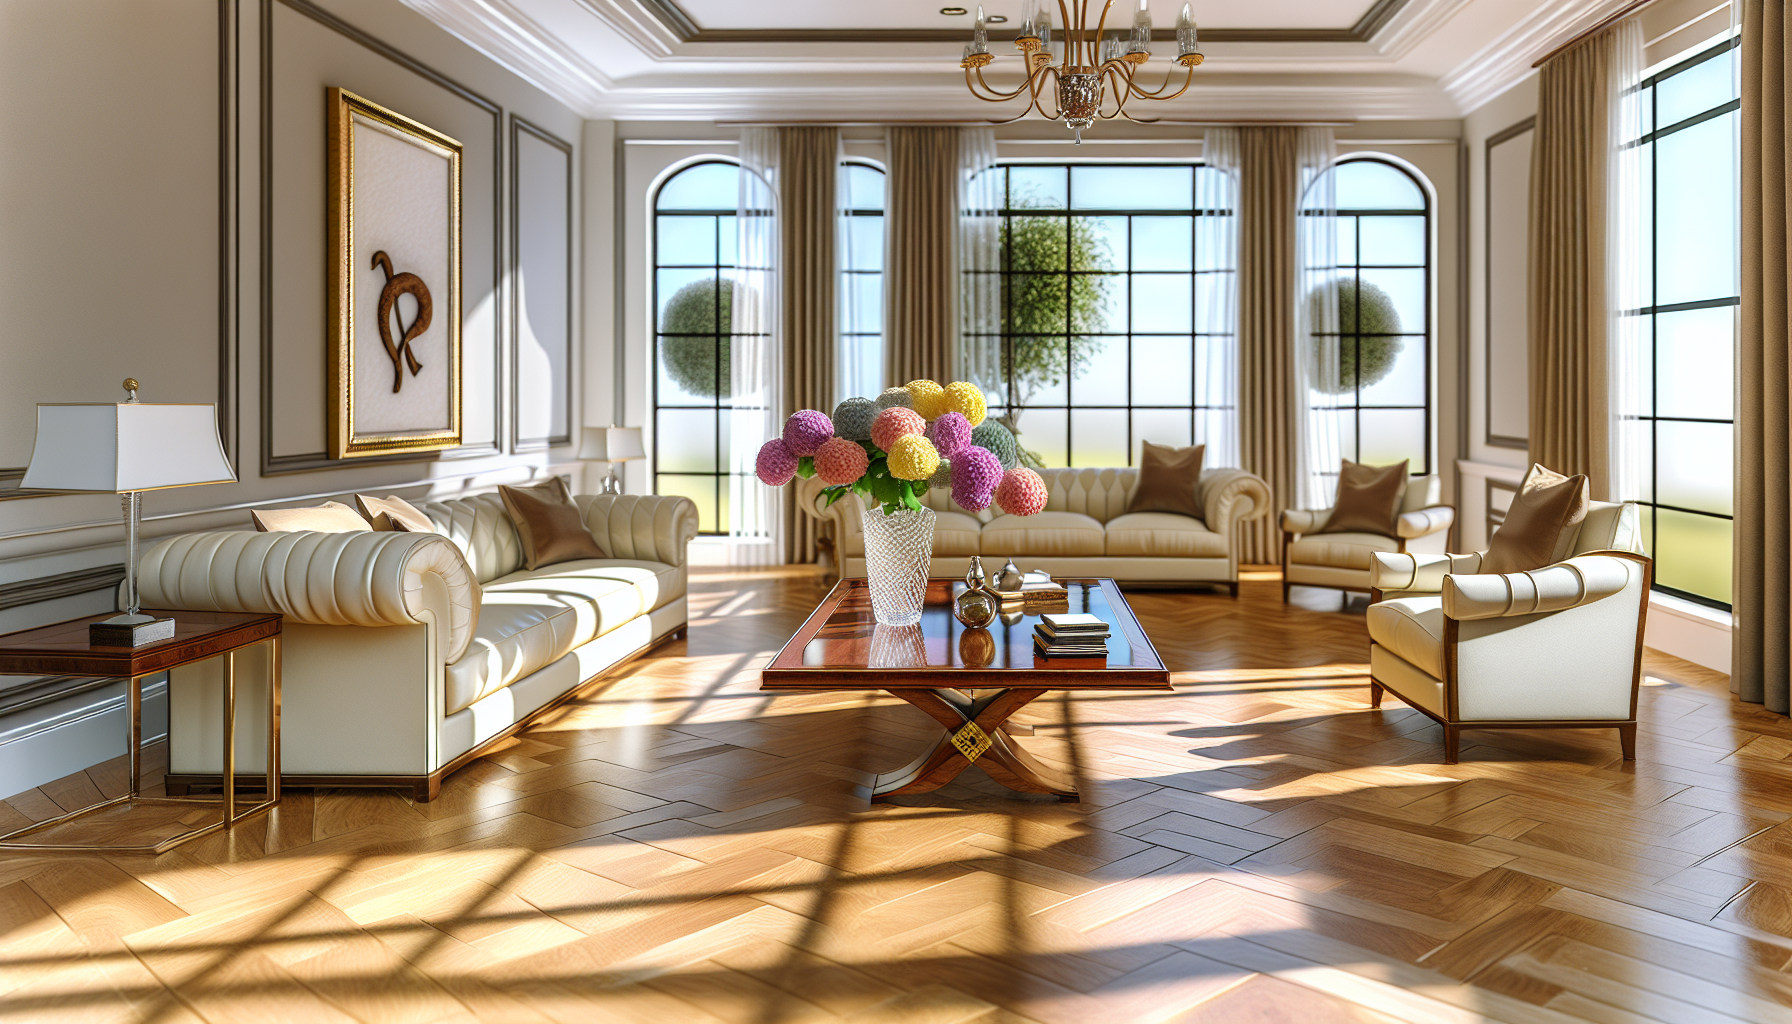 A beautifully designed luxury living room with comfortable seating and elegant furnishings